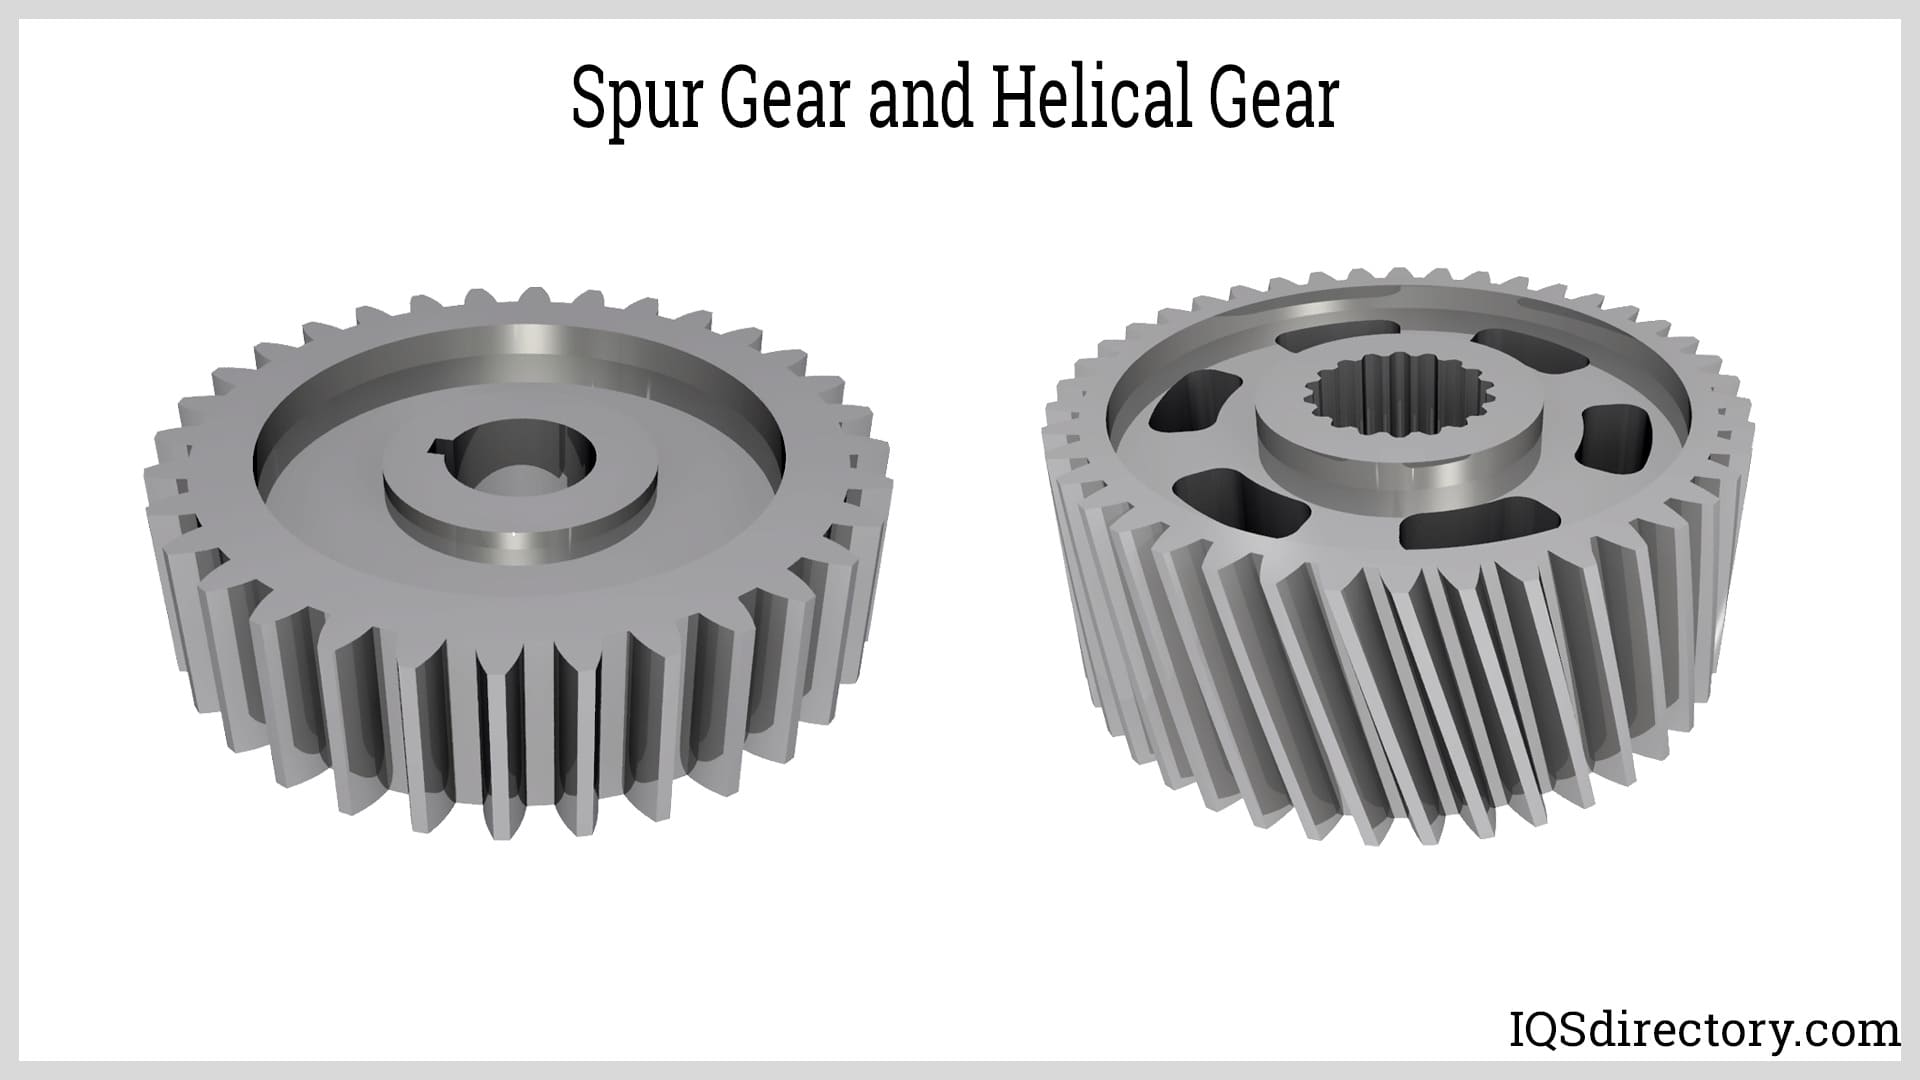 Spur Gear and Helical Gear